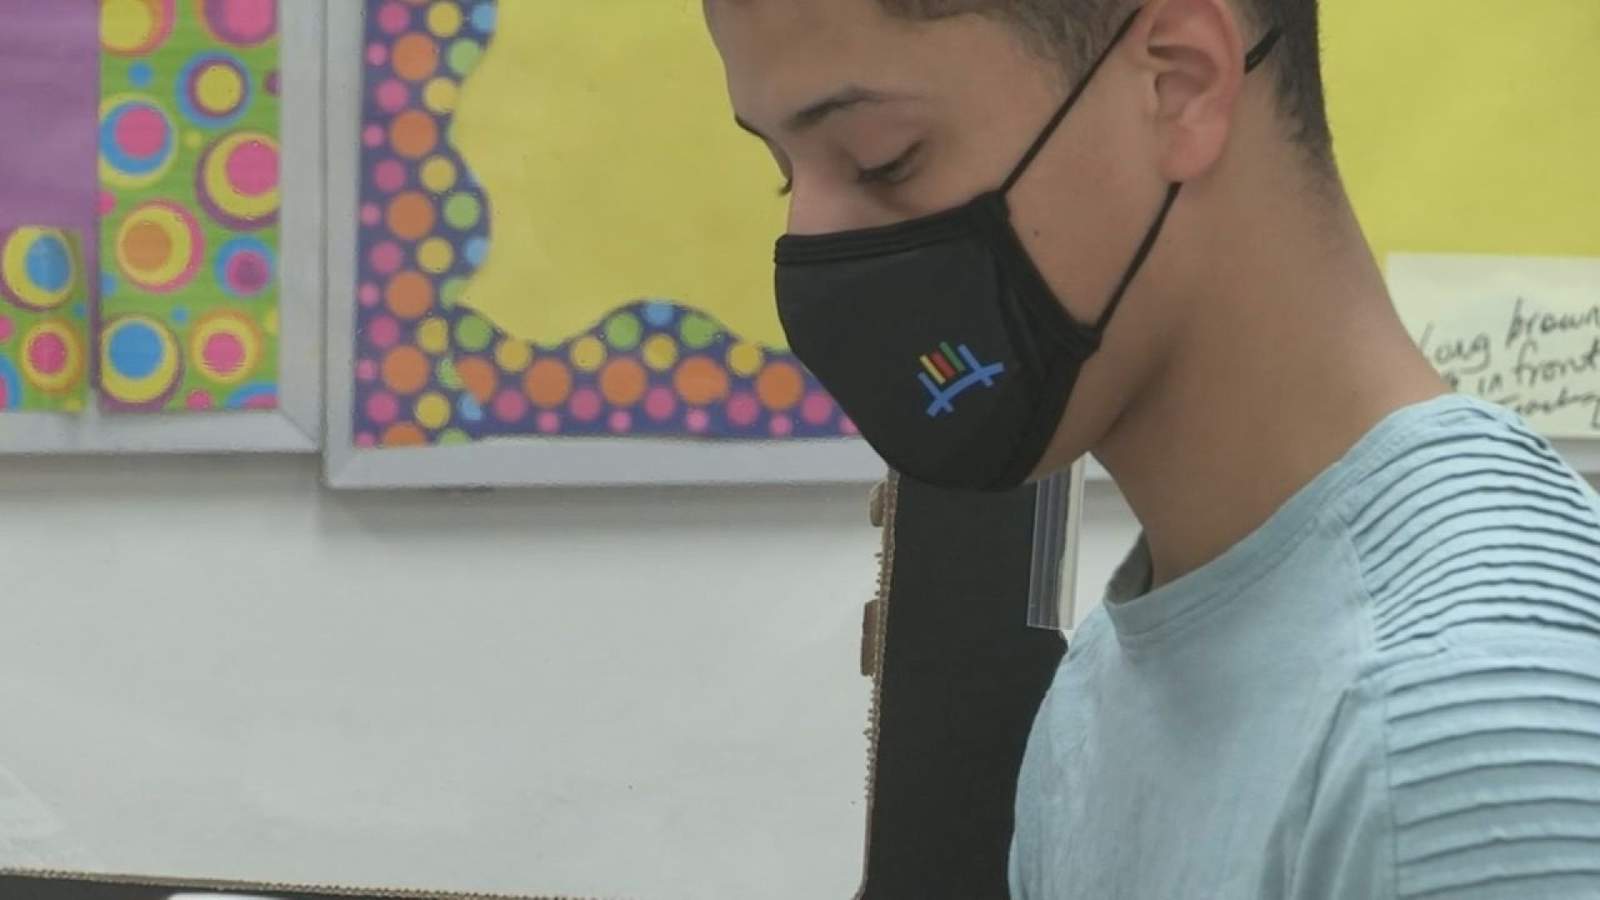 Duval students could be removed from school for repeated mask violations